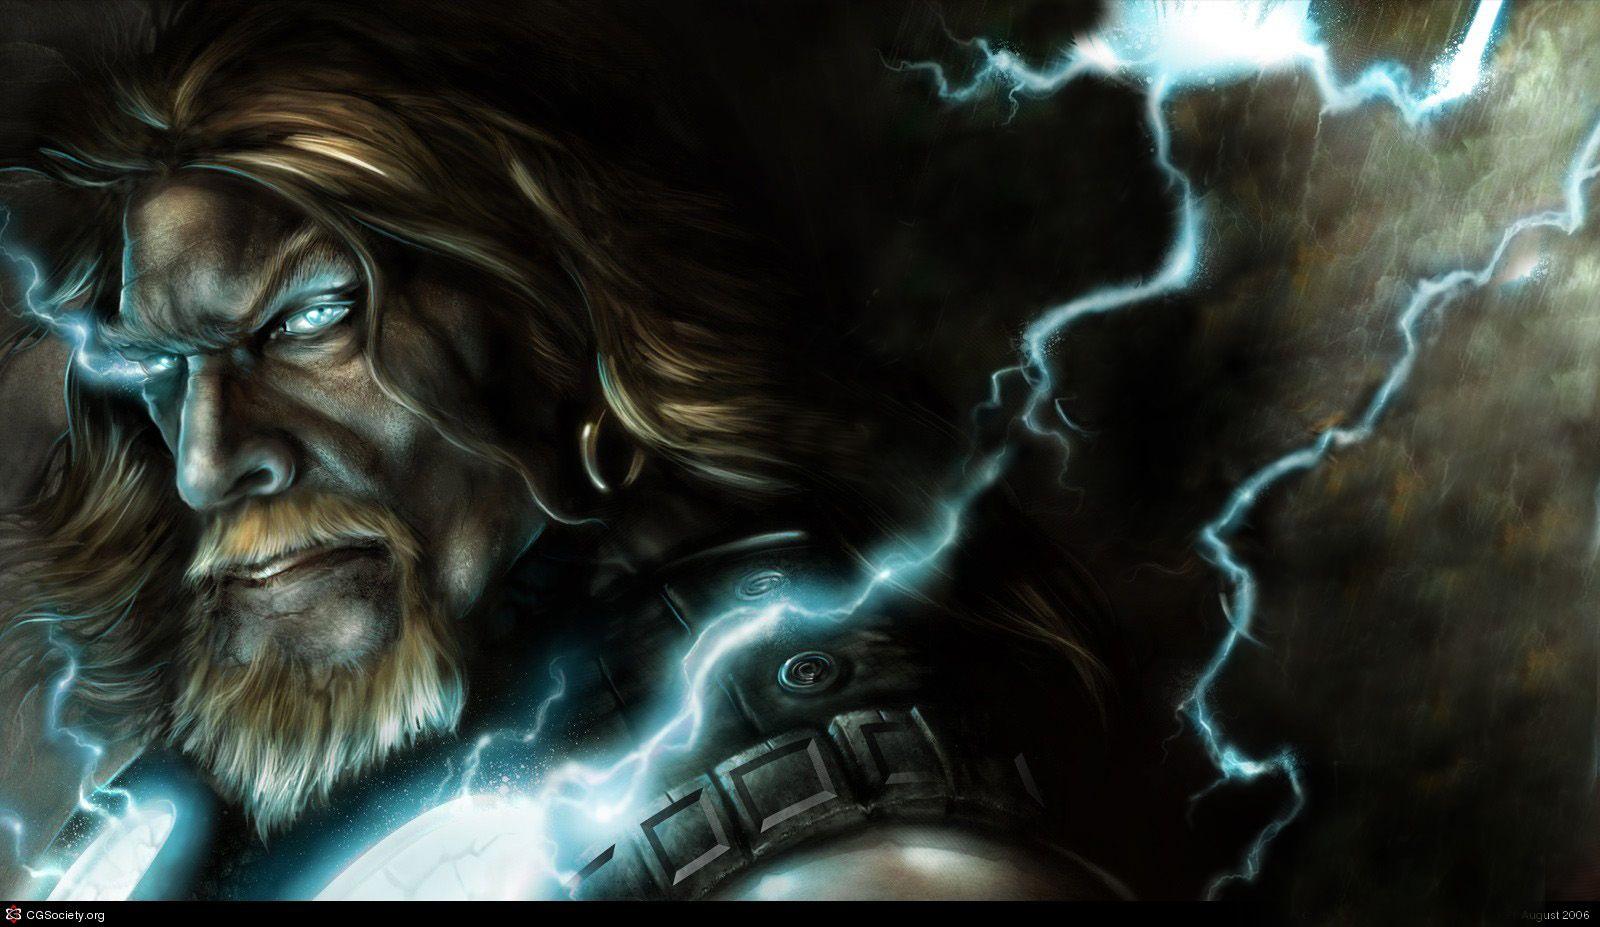 Download the Mean Thor Wallpaper, Mean Thor iPhone Wallpaper, Mean